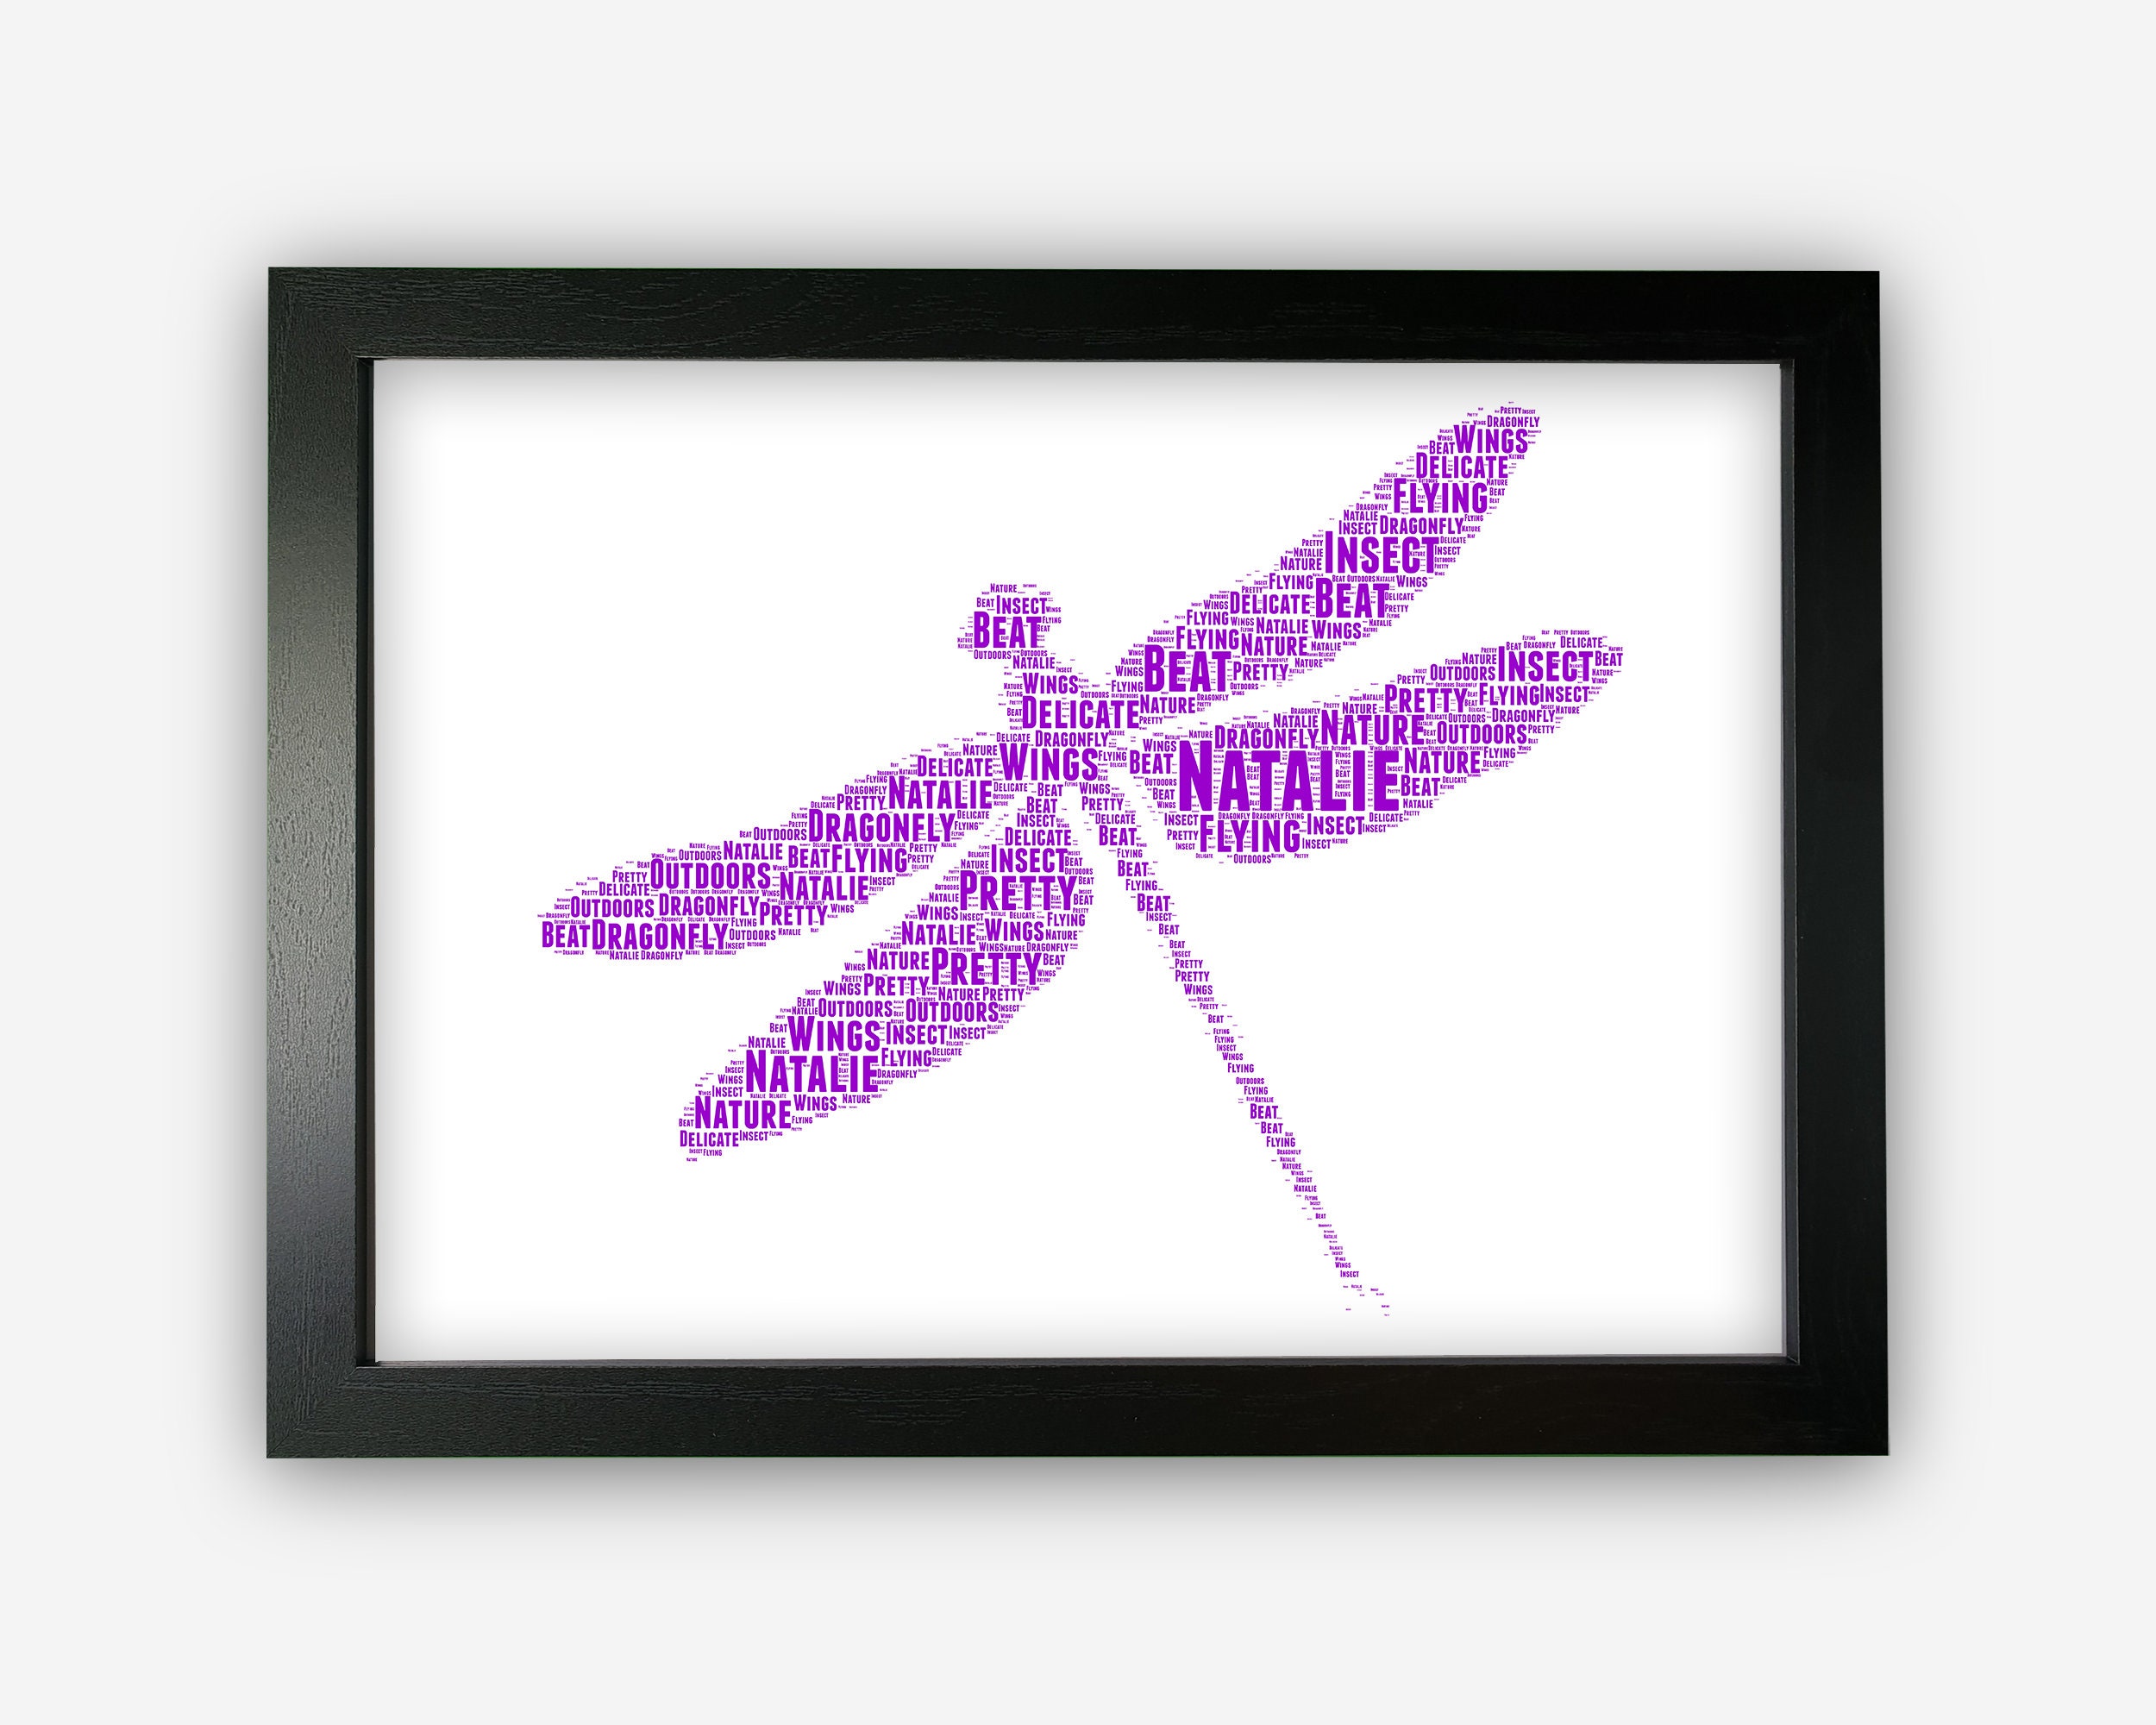 Dragonfly Gifts, Dragonfly Sign, Metal Garden Decor, Wreath Sign